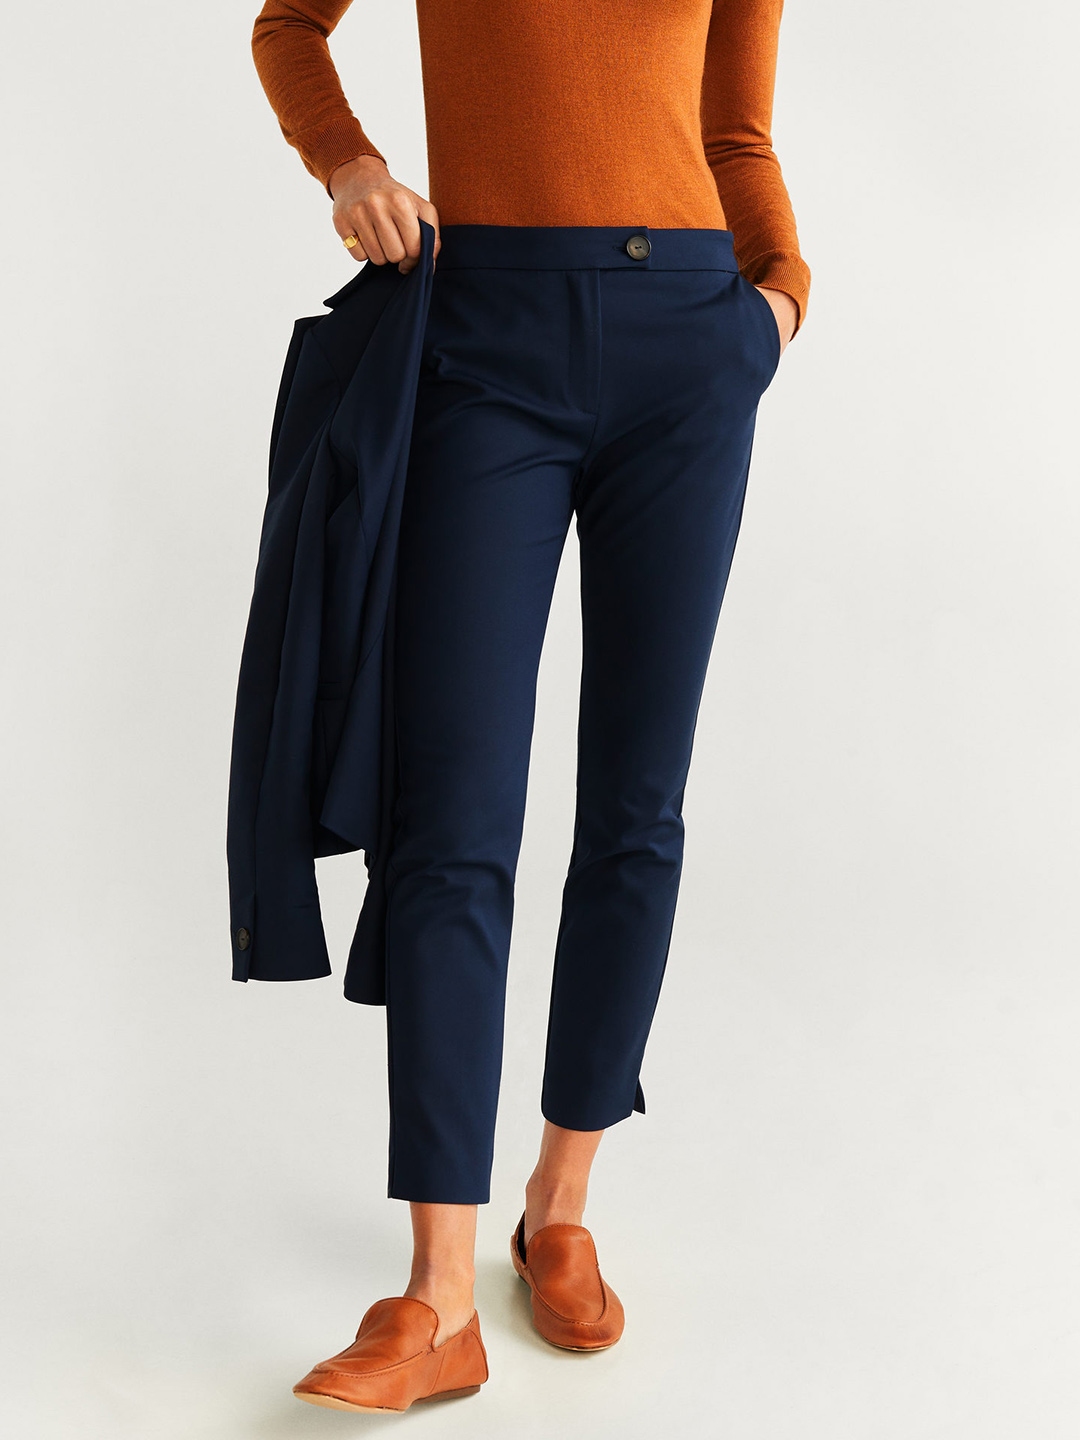 Buy MANGO Women Navy Blue Regular Fit Solid Sustainable Trousers  Trousers  for Women 11317454  Myntra